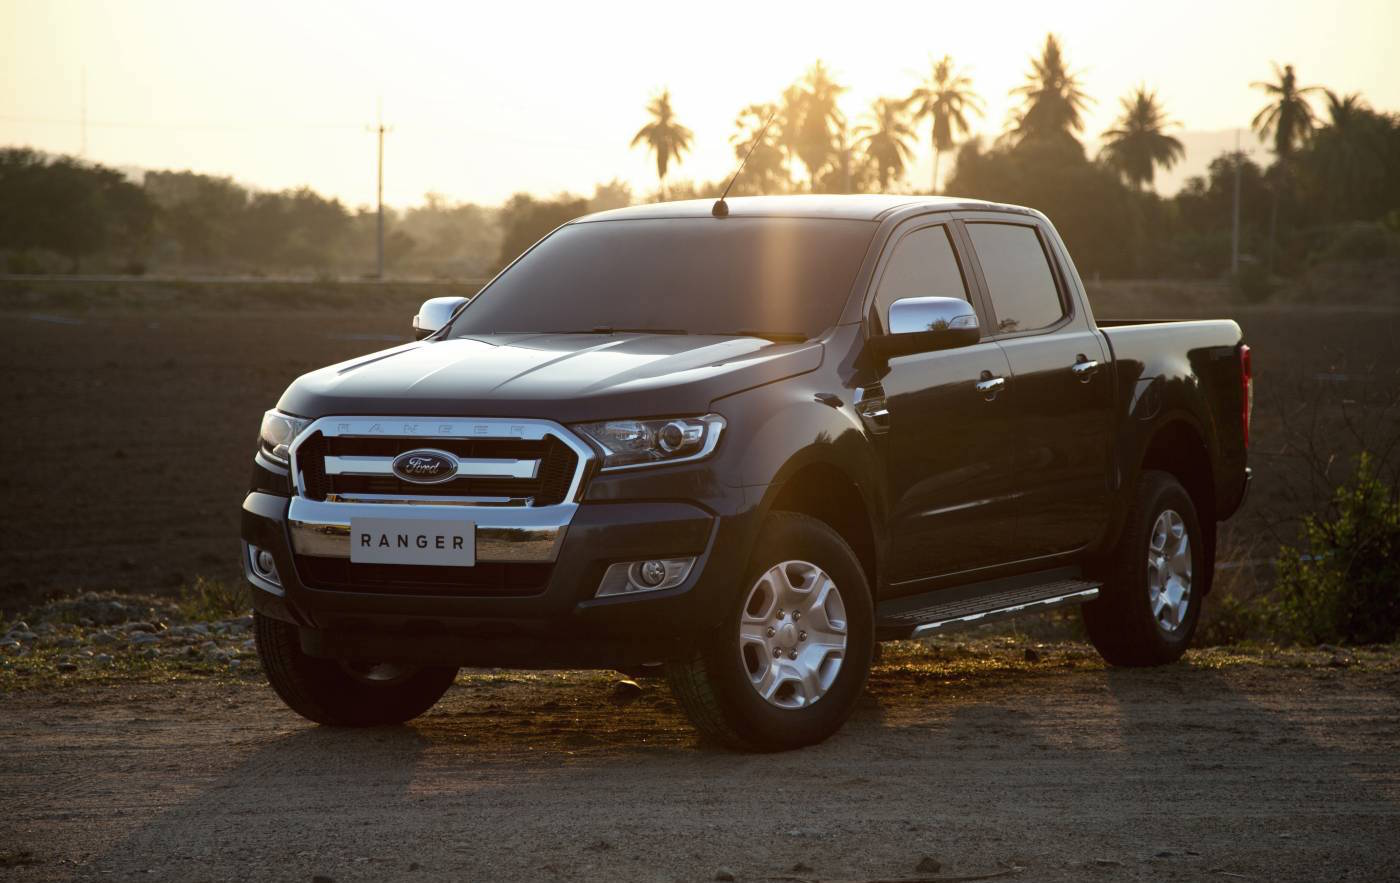 New Ford Ranger specs & features confirmed for Australia